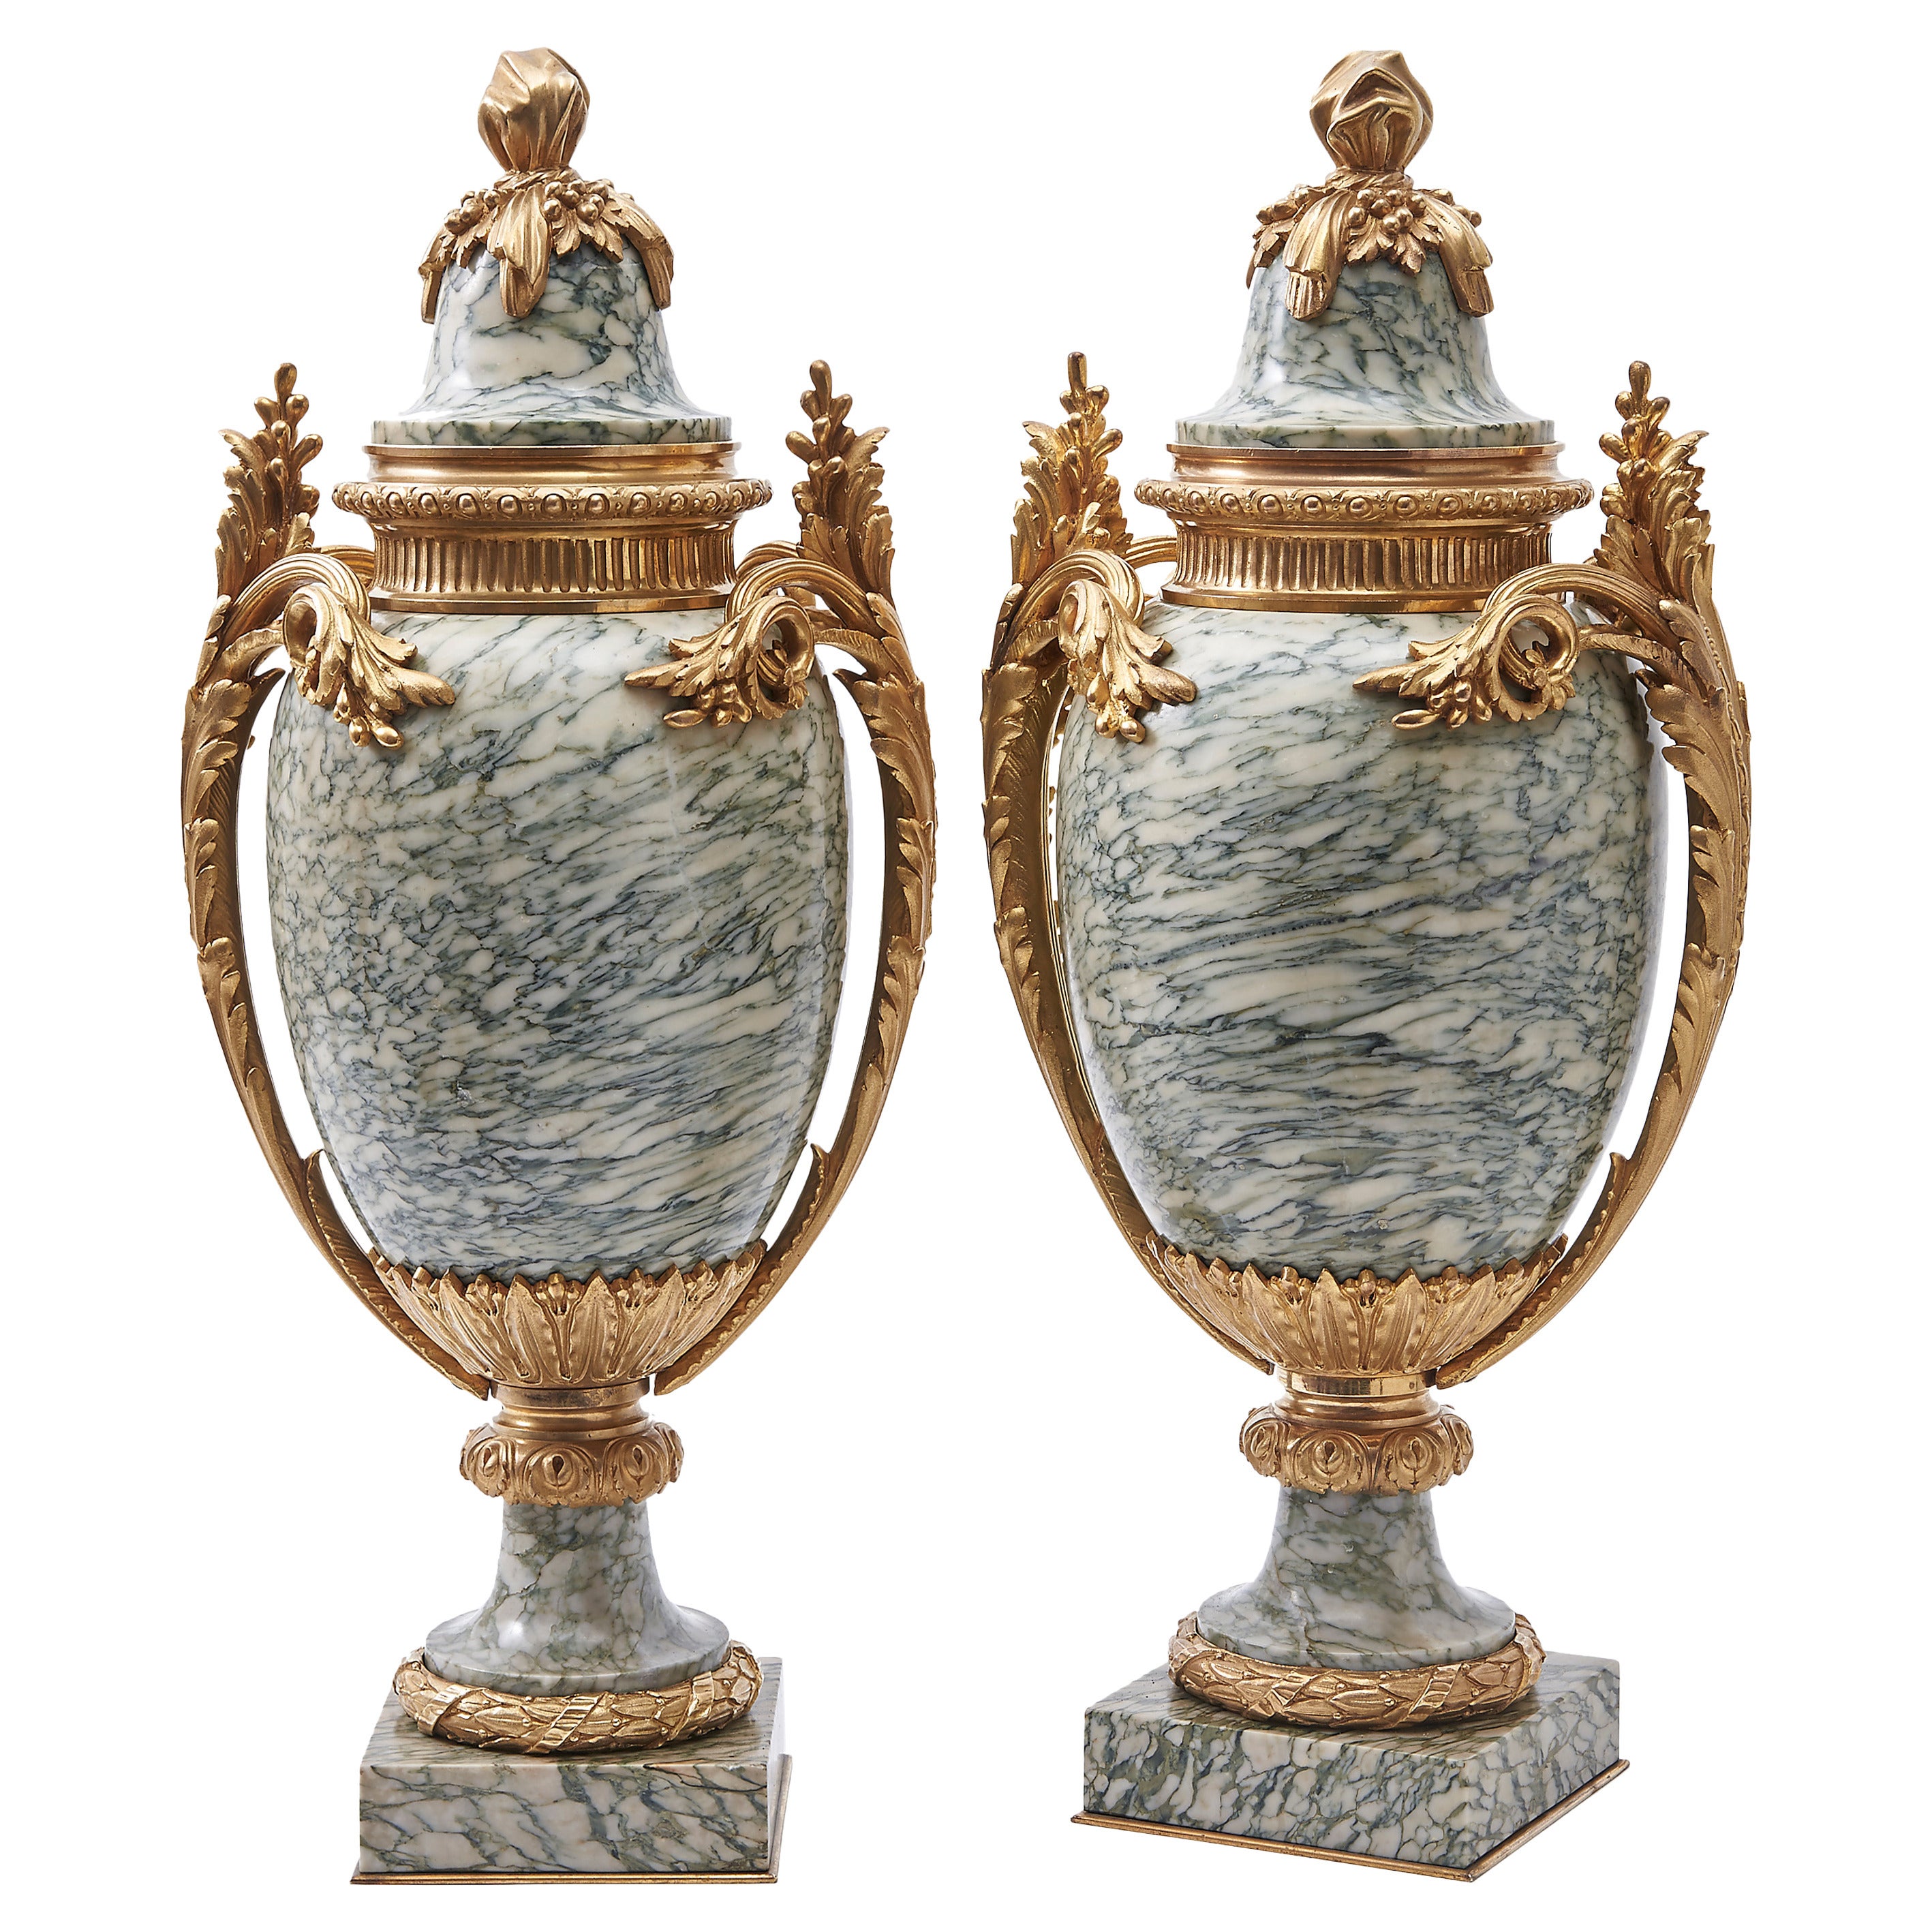 Pair of French Neoclassical Cipollino Marble Cassolettes, circa 1870